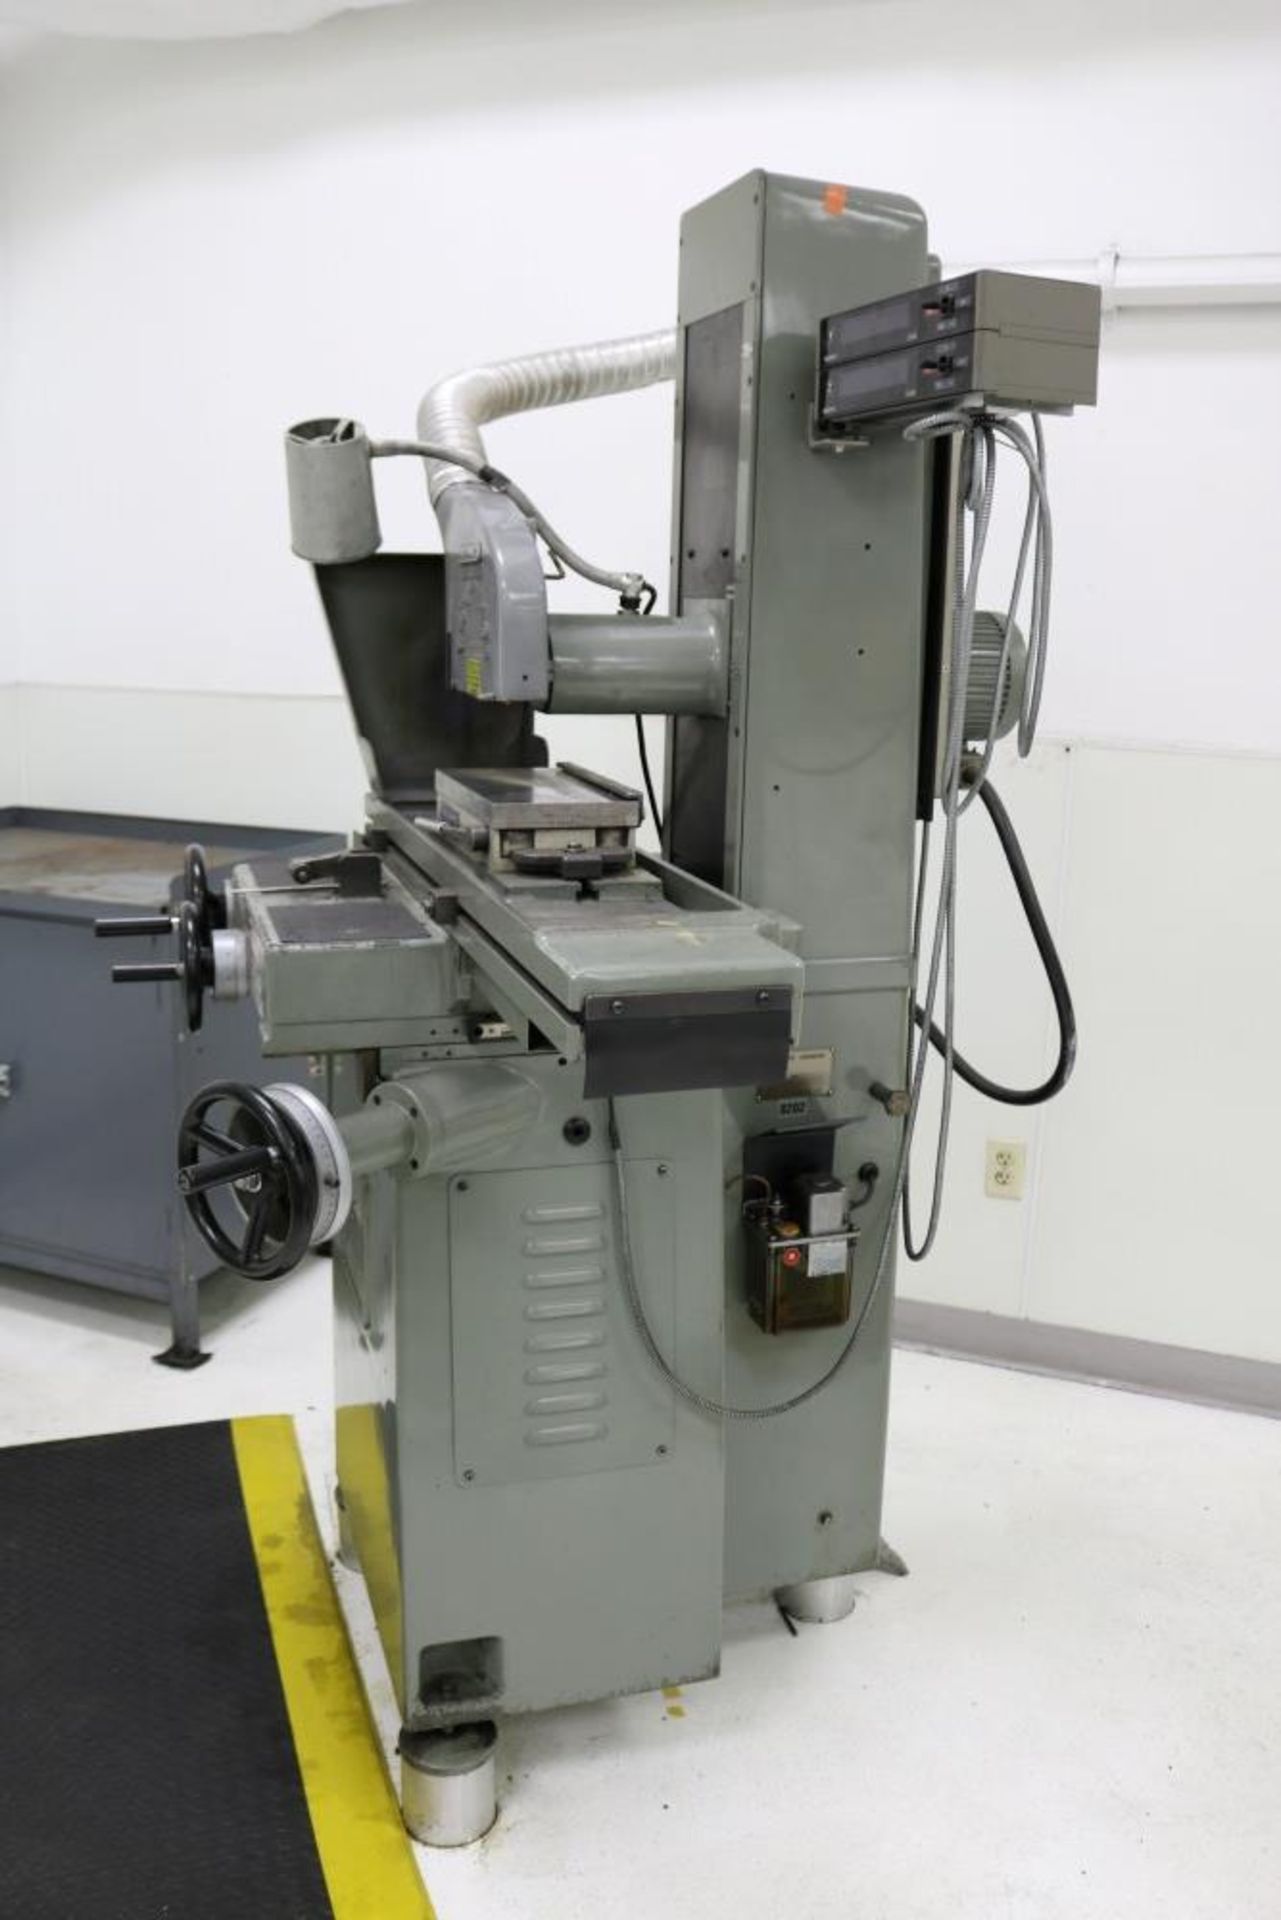 Precision Surface Grinder - Mitsui High-Tec 612 Model MSG-200MH w/ Vac-U- Guard - Image 4 of 9